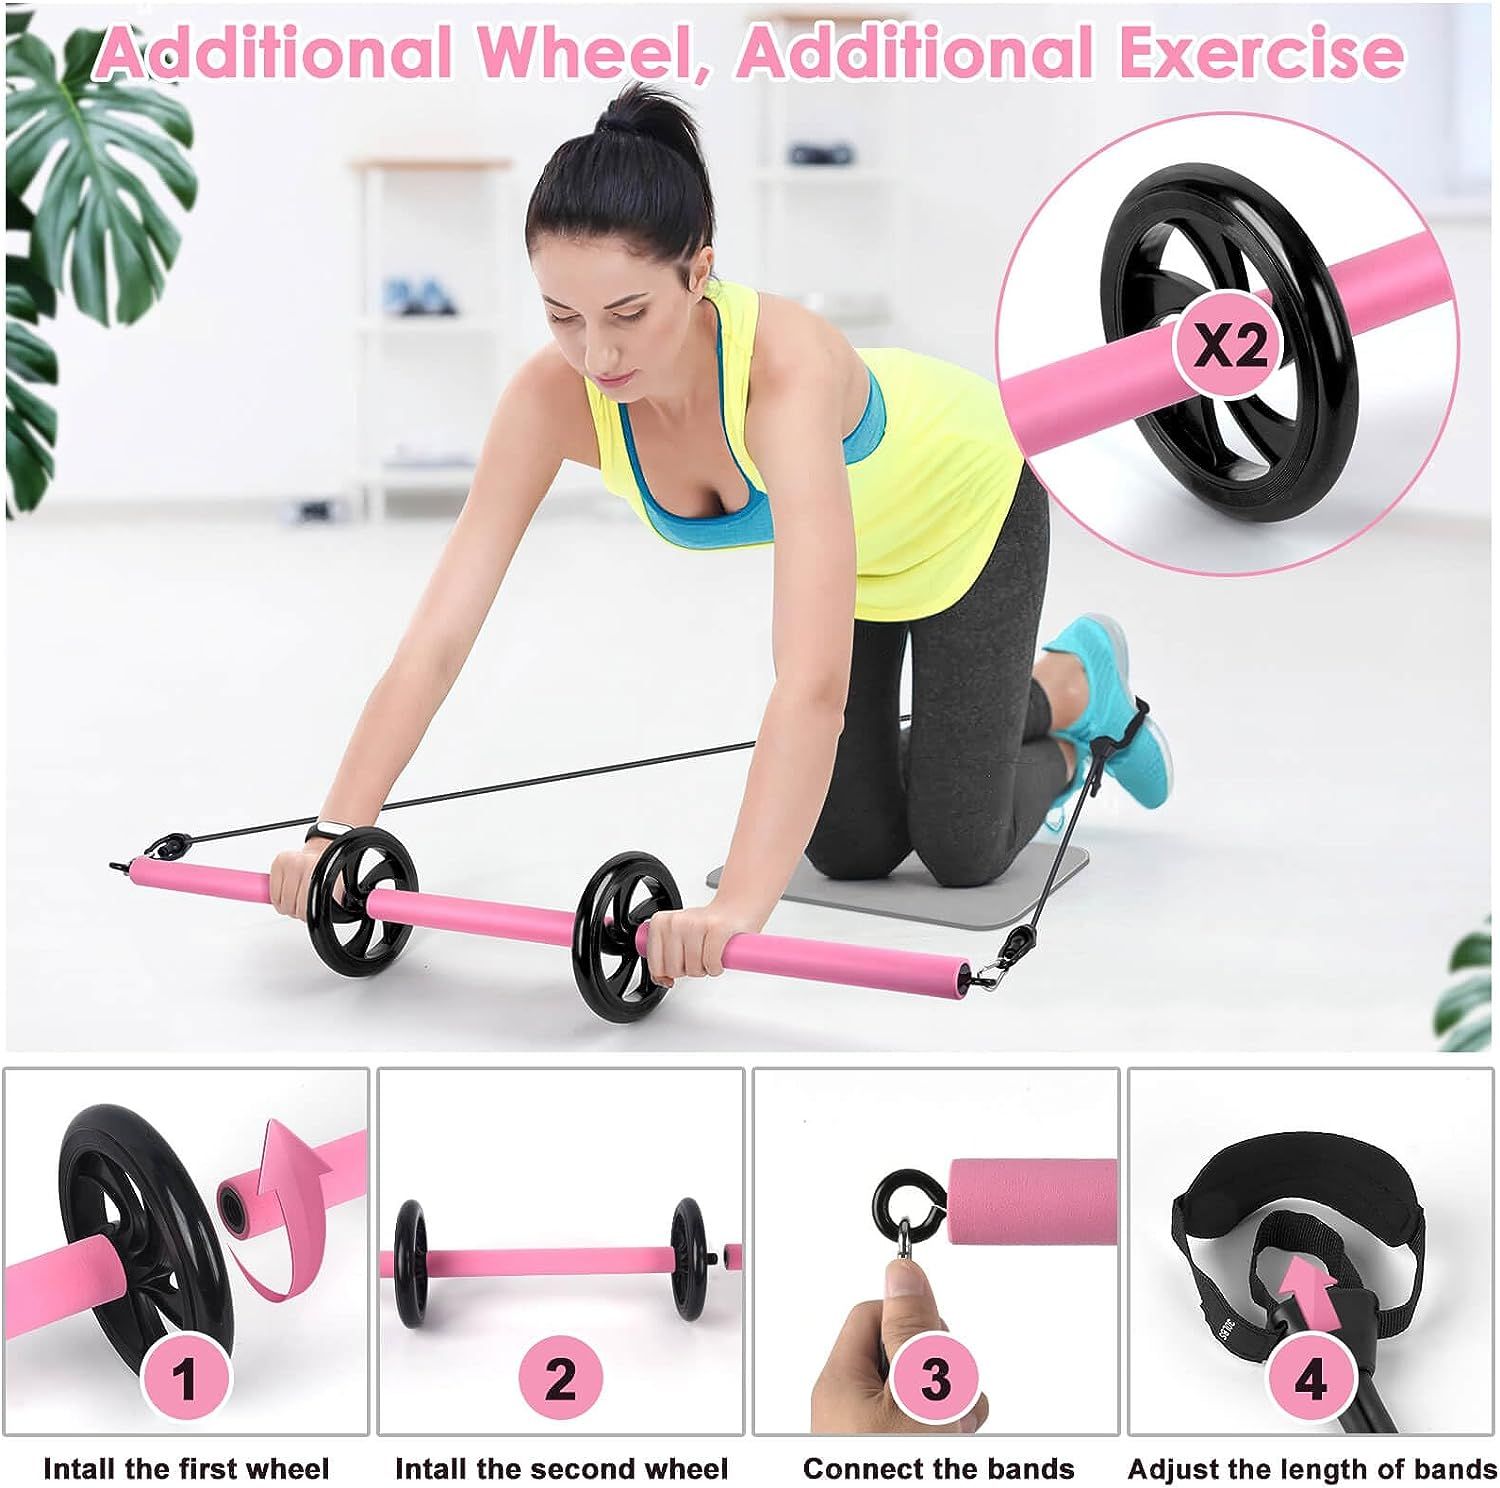  Pilates Bar Kit with Resistance Bands, Multifunctional Workout  Bar with Adjustment Buckle, 3-Section Portable Home Gym Pilates Resistance Bar  Kit for Women Full Body Workouts : Sports & Outdoors